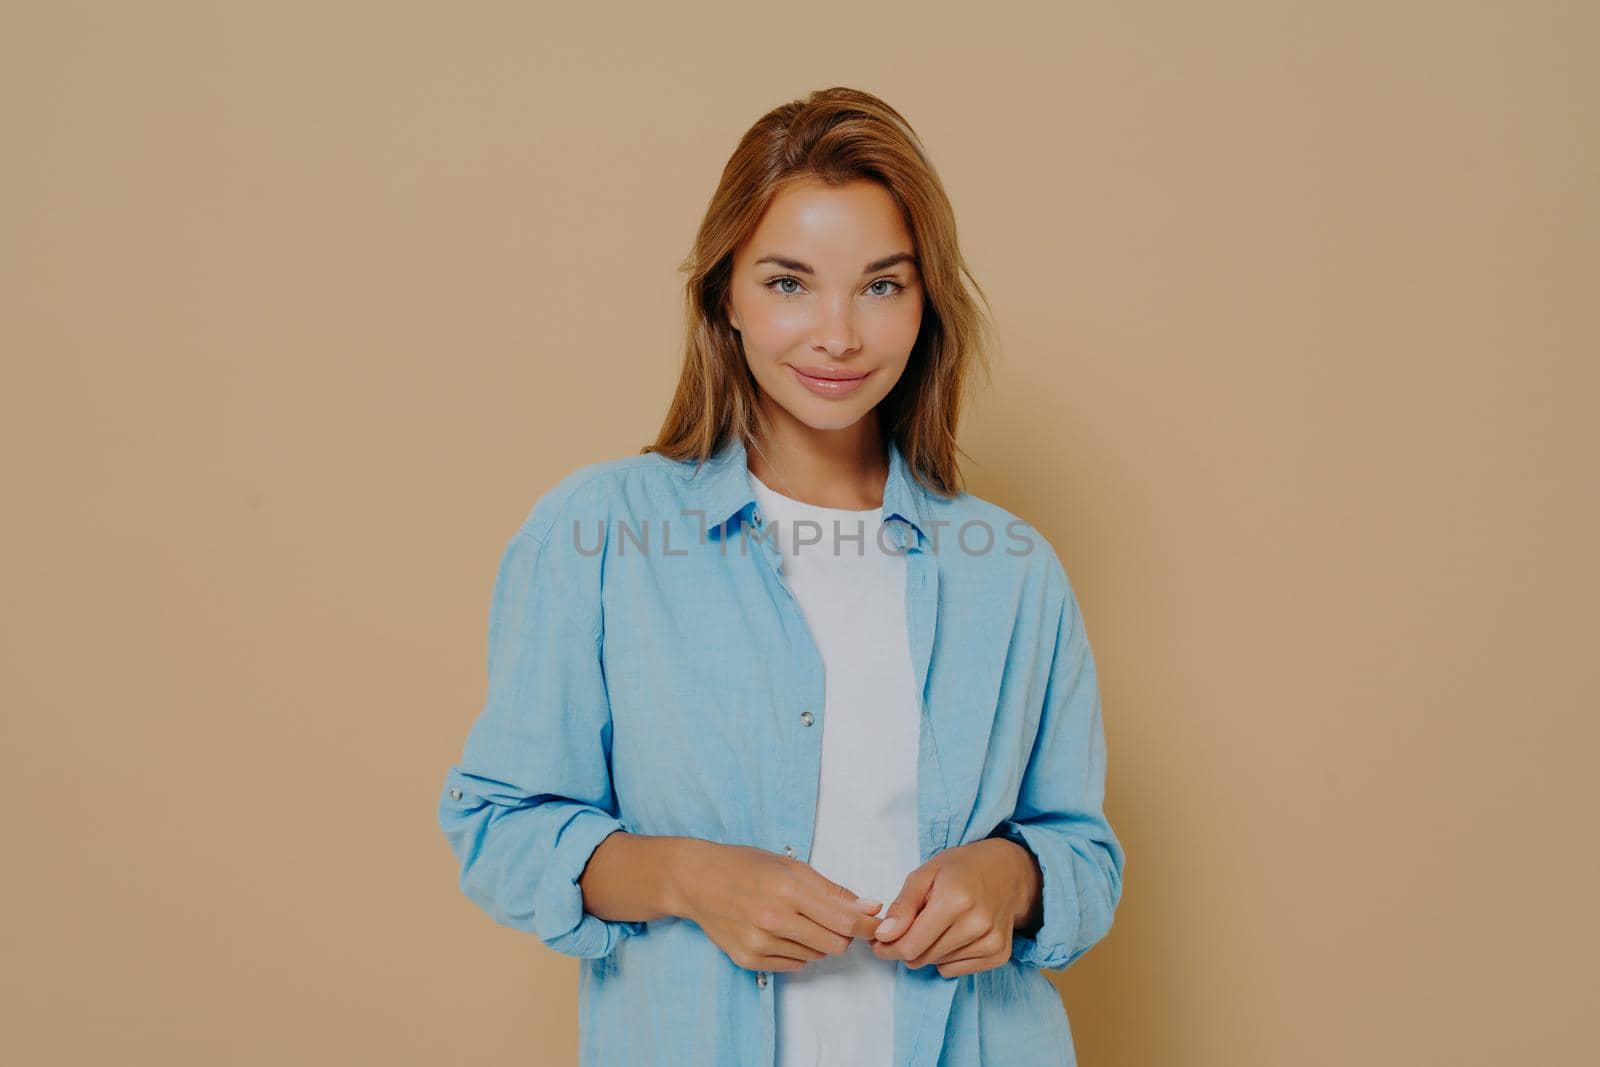 Young woman in stylish outfit posing on beige background by vkstock